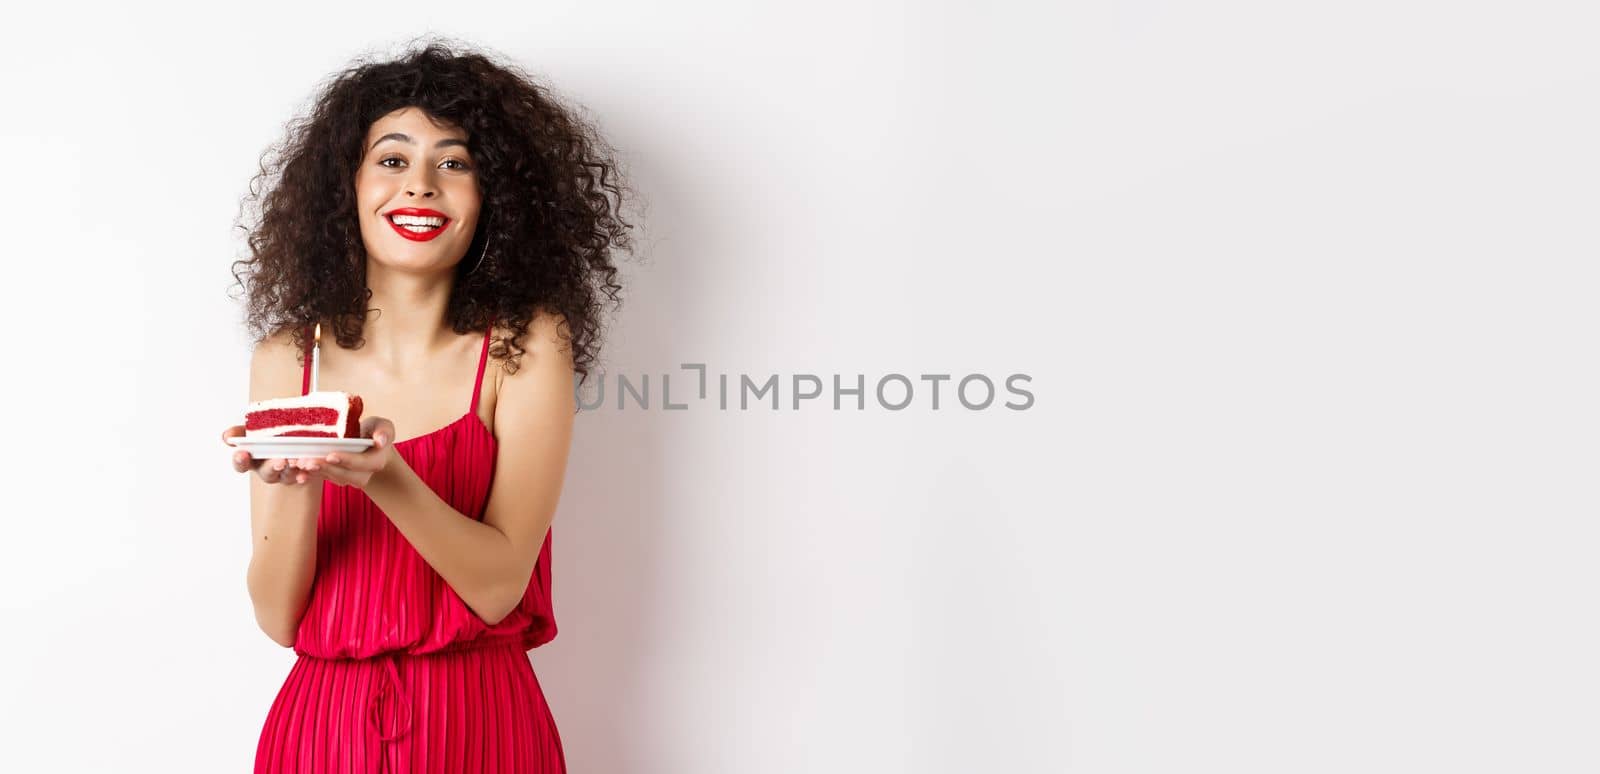 Beautiful lady in red dress celebrating birthday, holding piece of cake with candle and smiling, standing happy on white background.